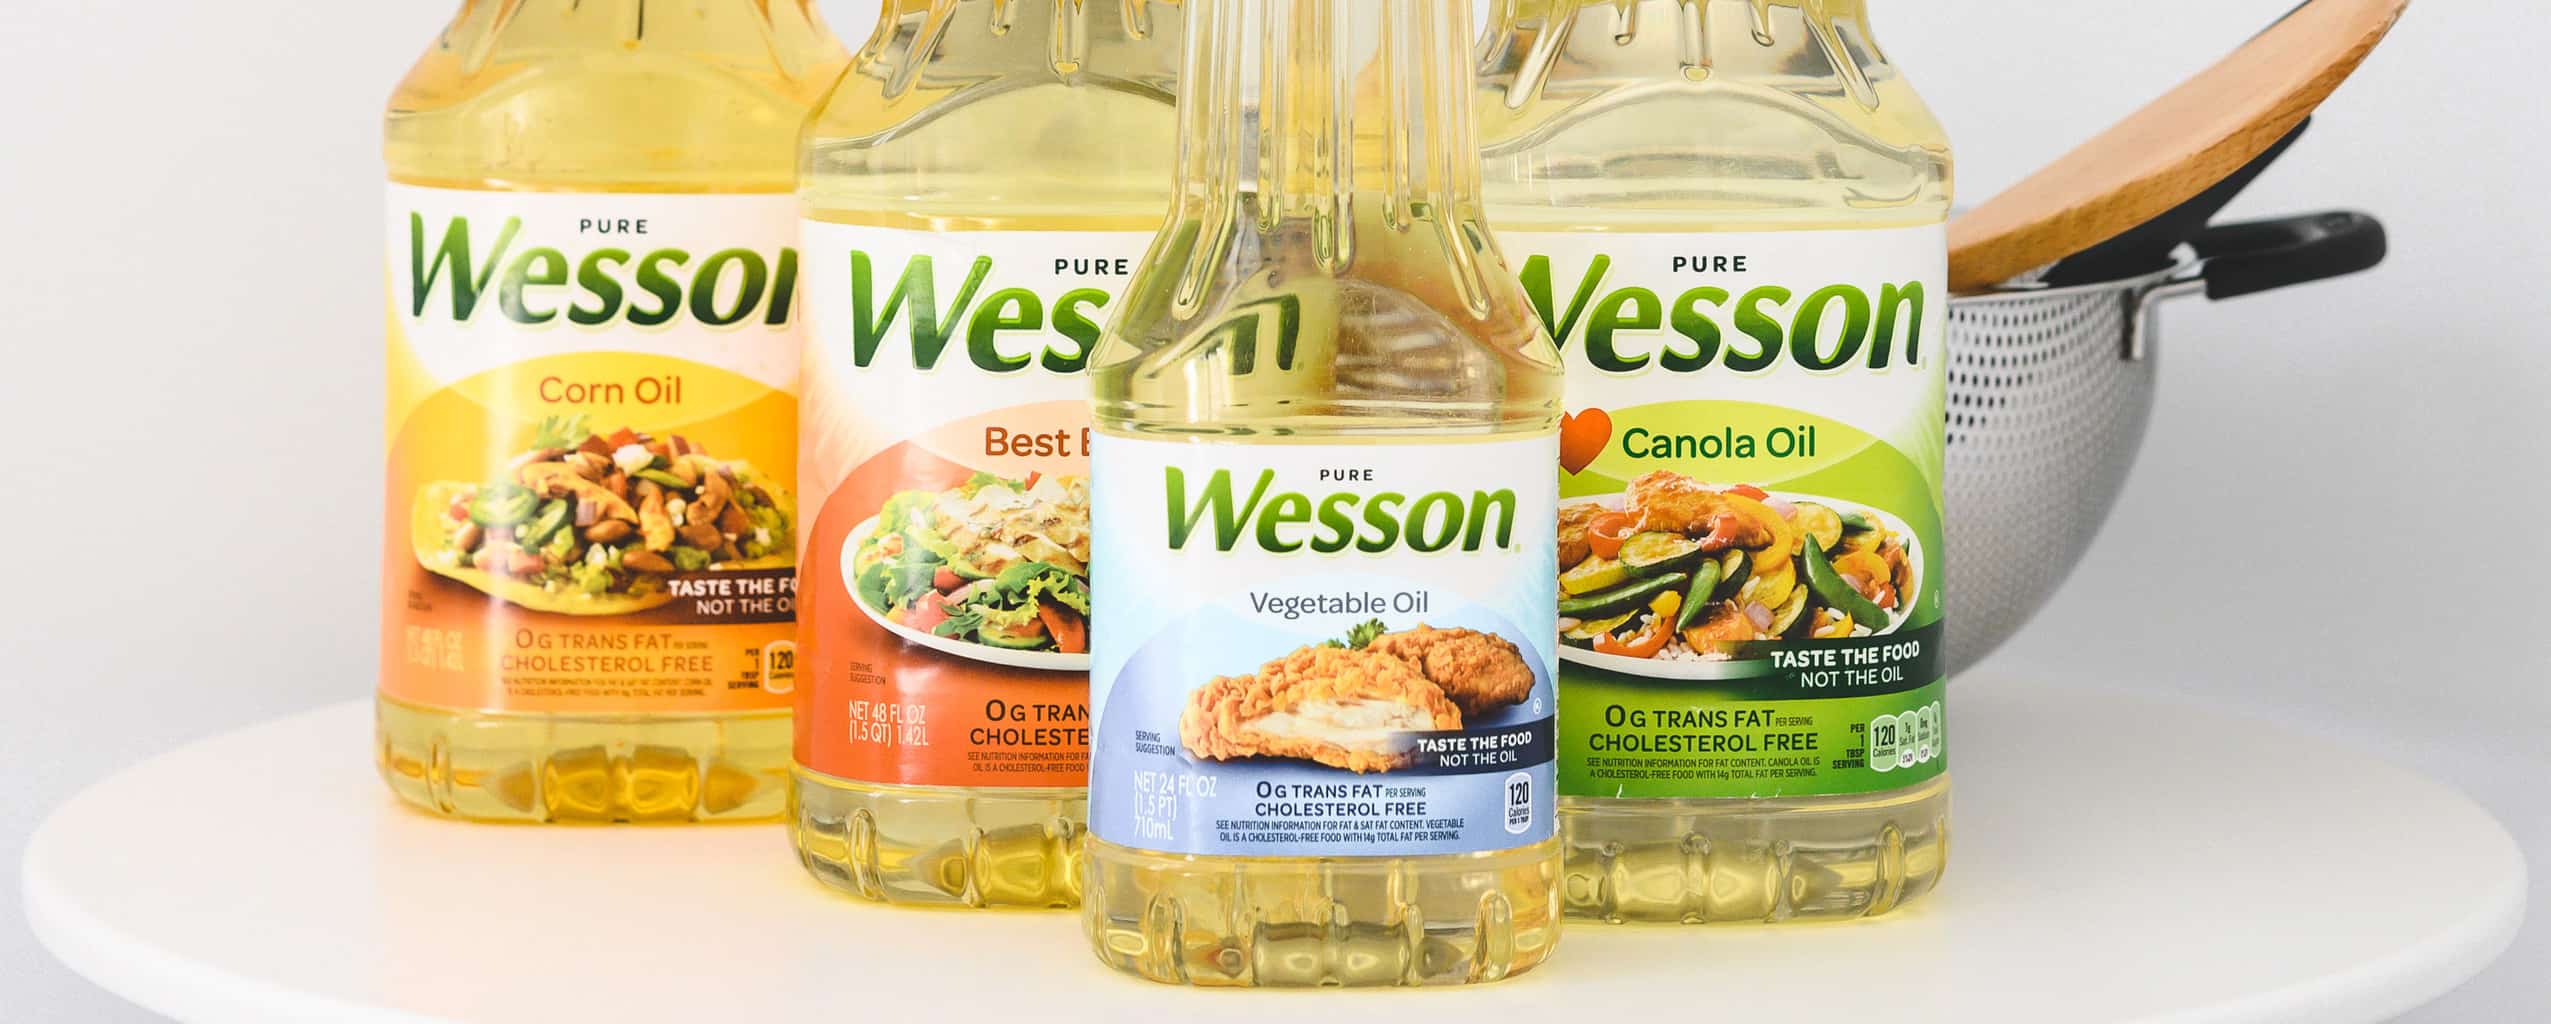 Featured image for “RICHARDSON INTERNATIONAL COMPLETES THE ACQUISITION OF A LEADING U.S. COOKING OIL BRAND, WESSON®, AND MEMPHIS PRODUCTION FACILITY”